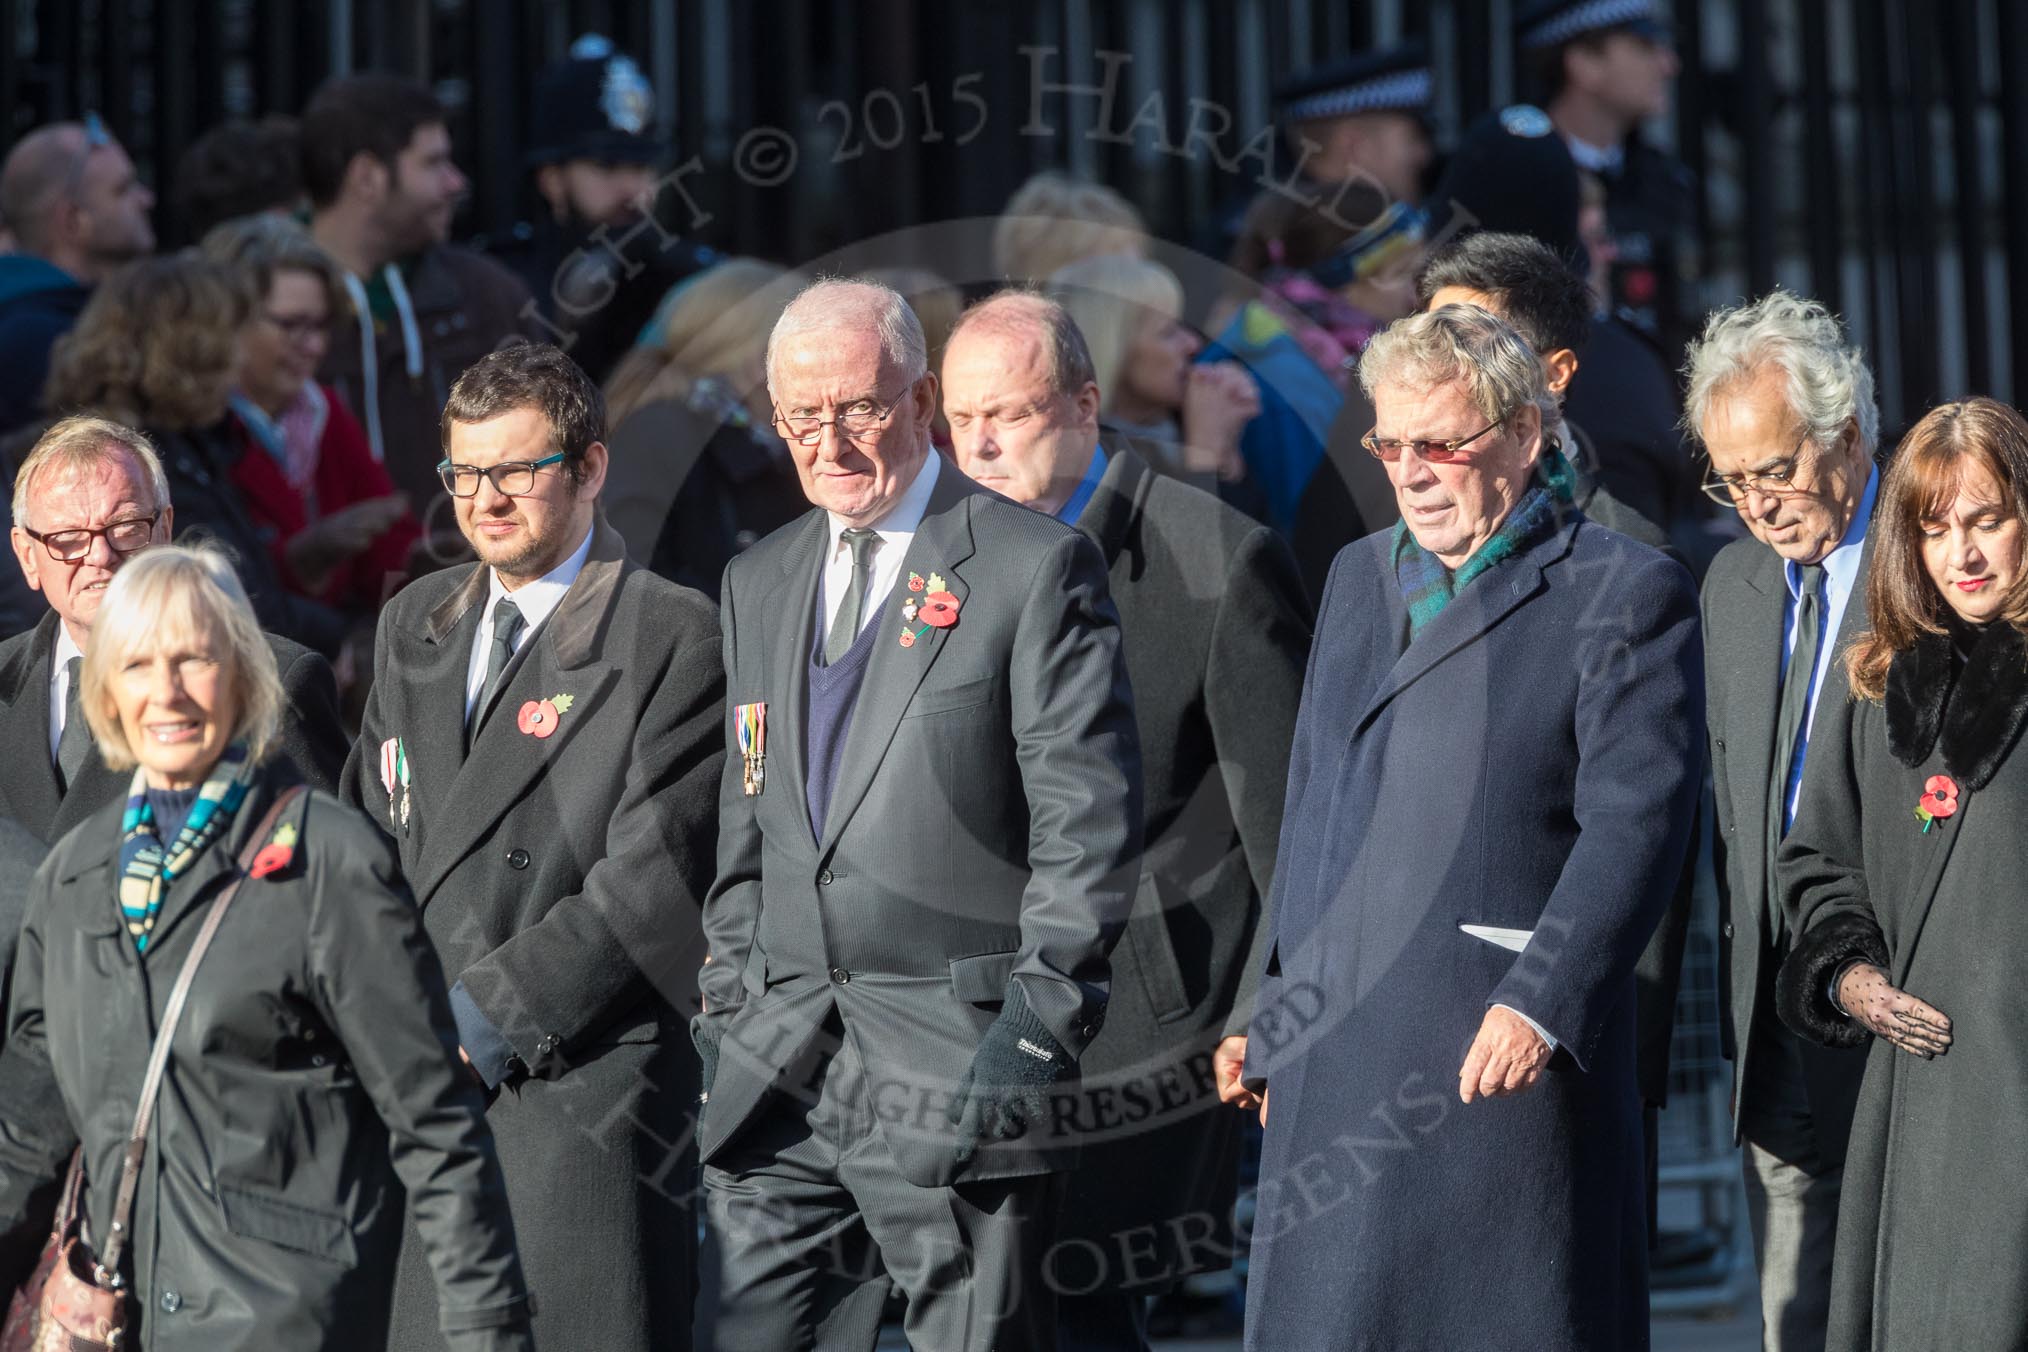 March Past, Remembrance Sunday at the Cenotaph 2016: M29 Rotary International.
Cenotaph, Whitehall, London SW1,
London,
Greater London,
United Kingdom,
on 13 November 2016 at 13:17, image #2749